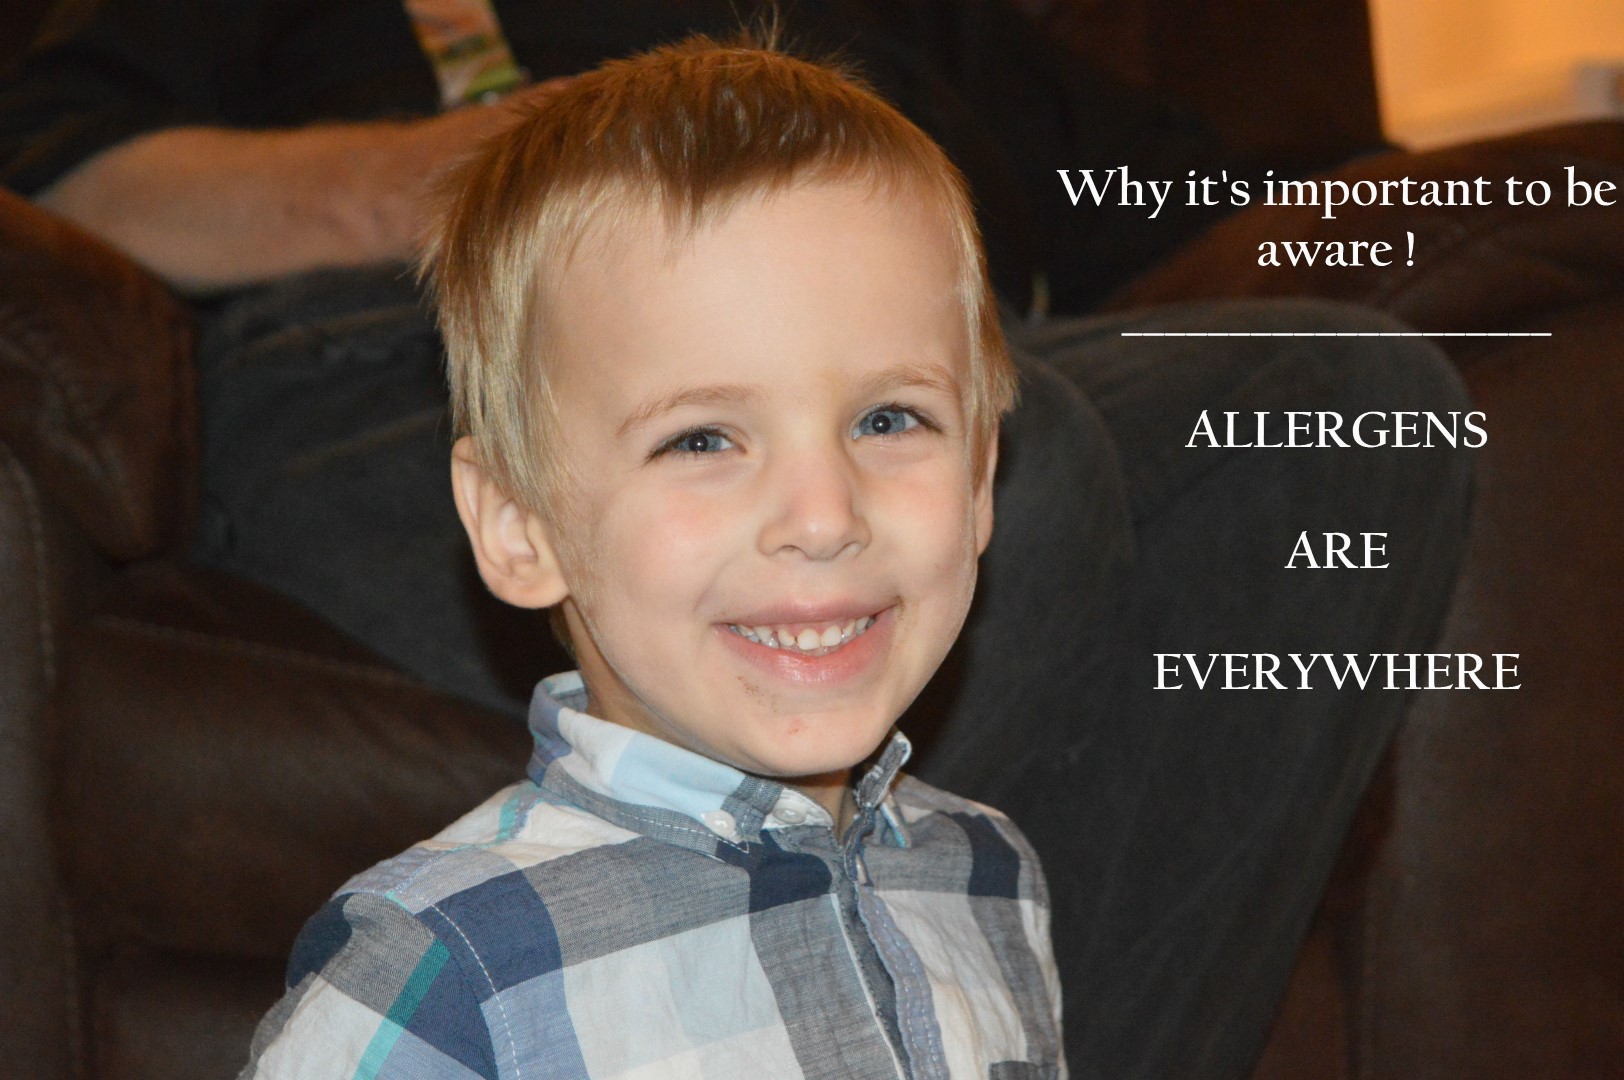 Allergens are everywhere 2